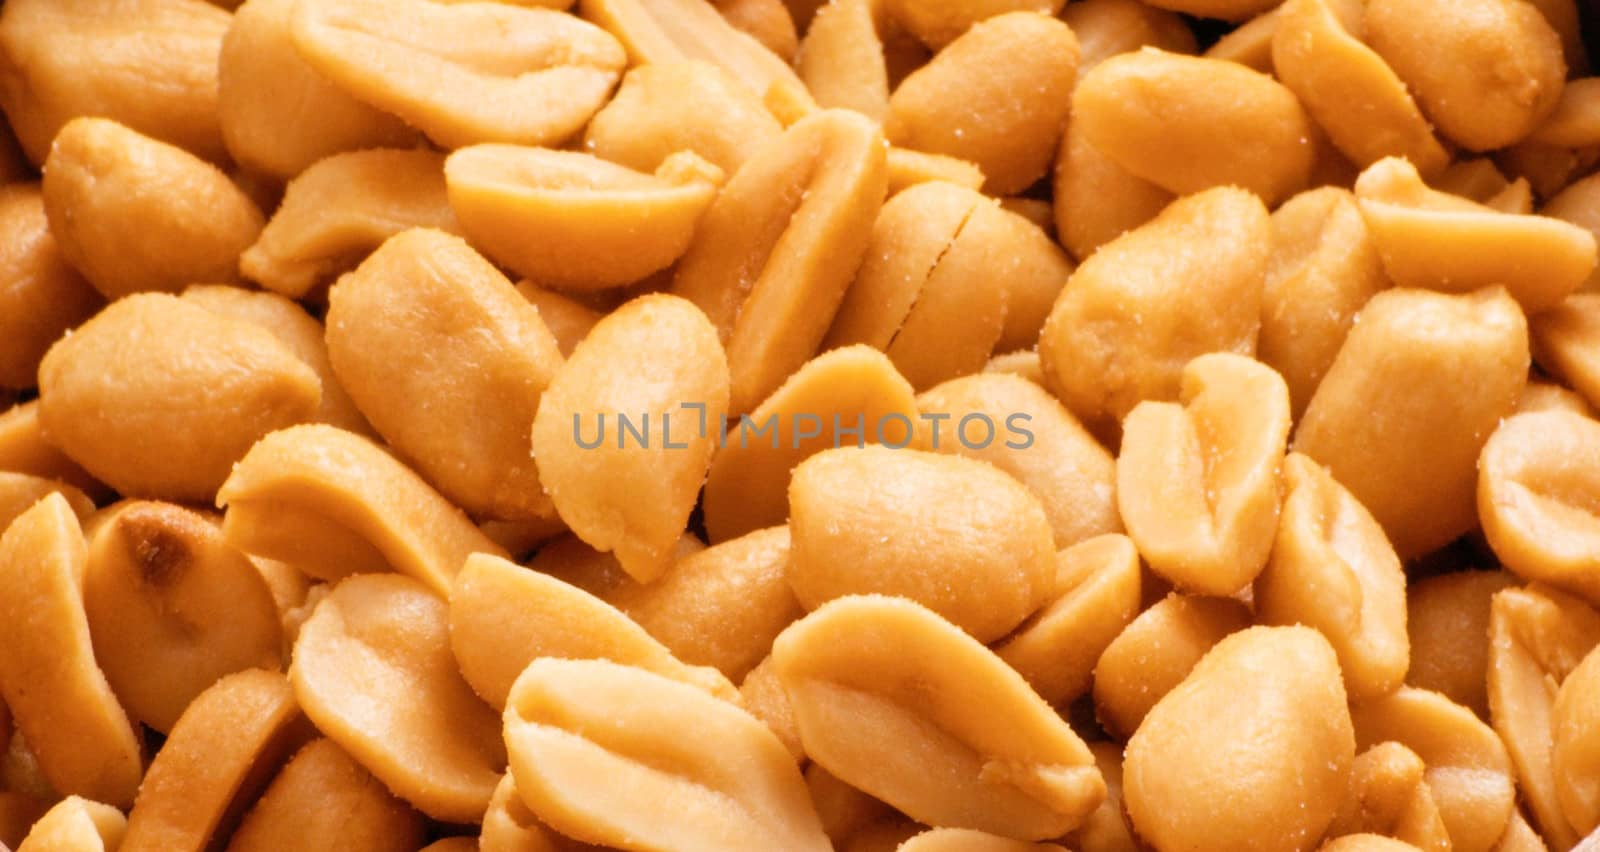 Extreme close-up image of peanuts